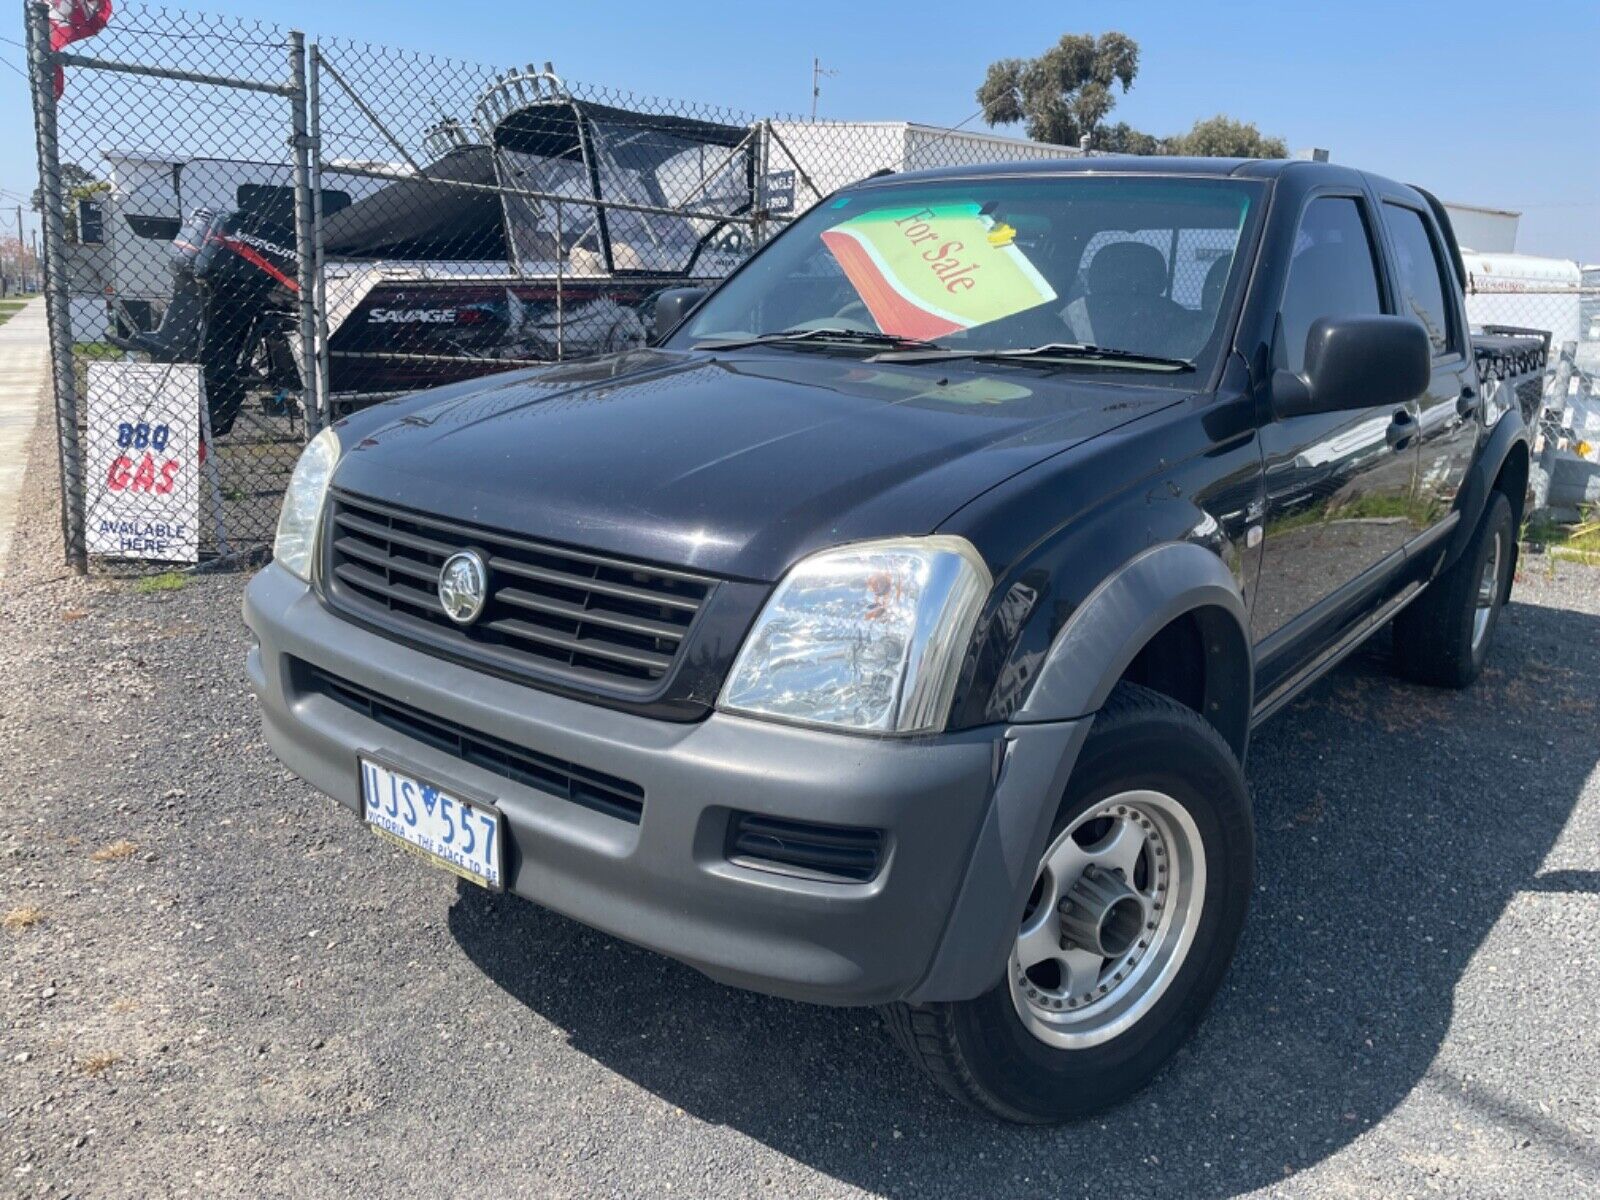 HOLDEN RODEO 2006 runs great selling as is where is Runs great